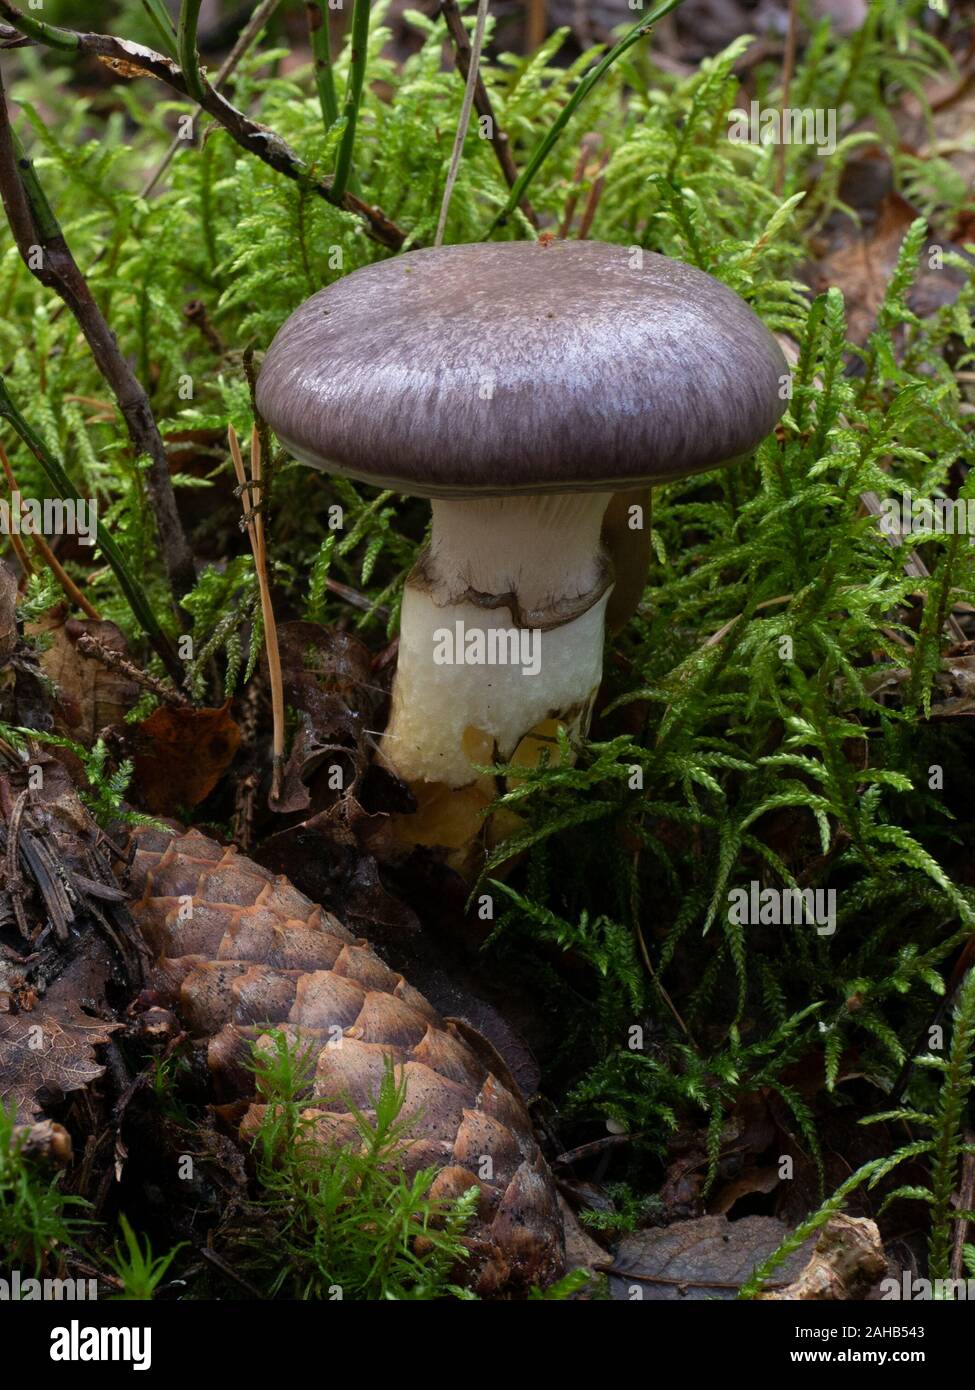 Gomphidius glutinosus, commonly known as the slimy spike-cap, growing in Görvälns naturreservat, Sweden. Stock Photo